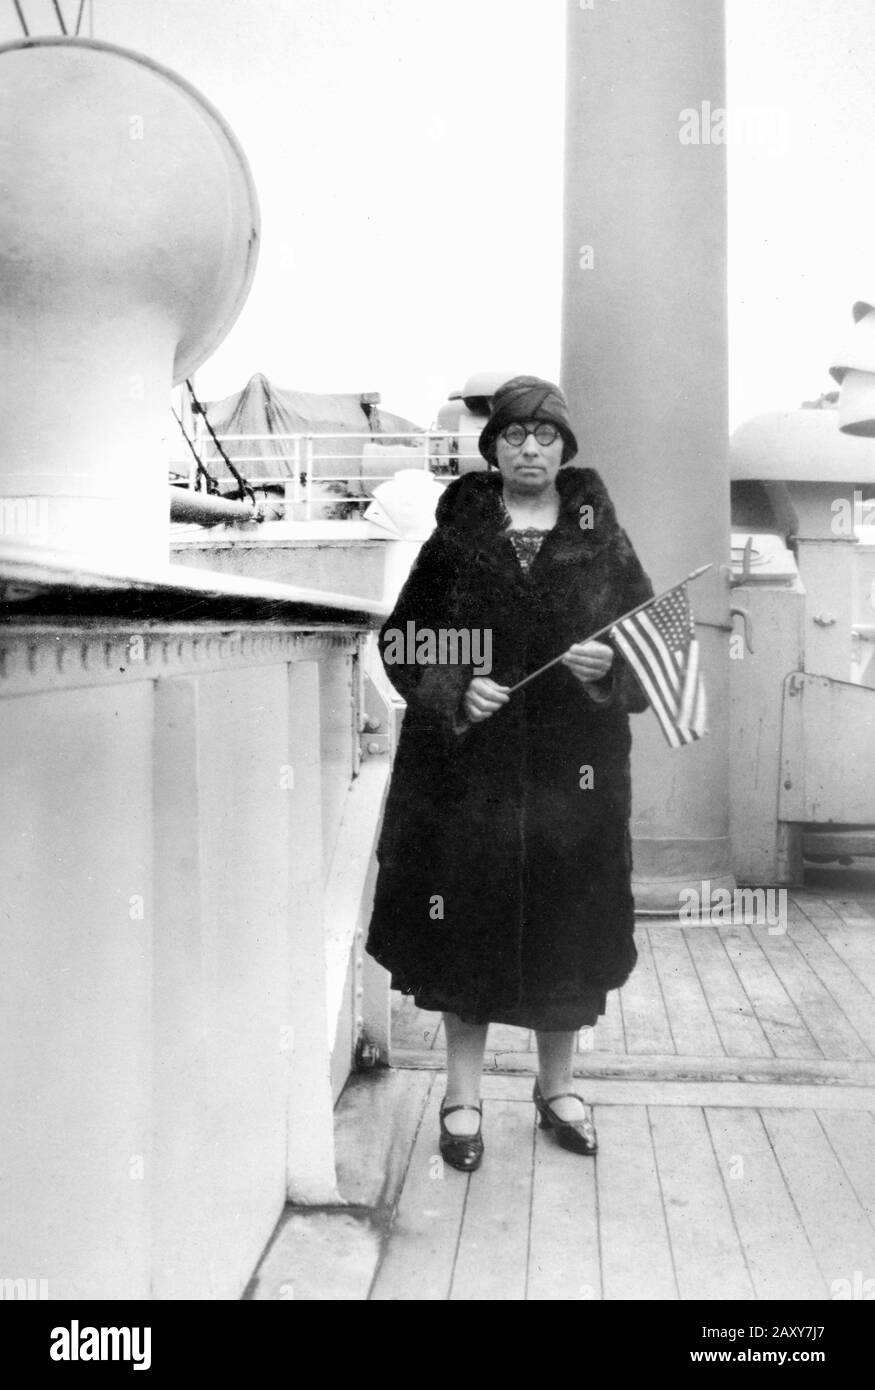 A iwoman on a ship deck stands with an American flag, ca. 1910. Stock Photo